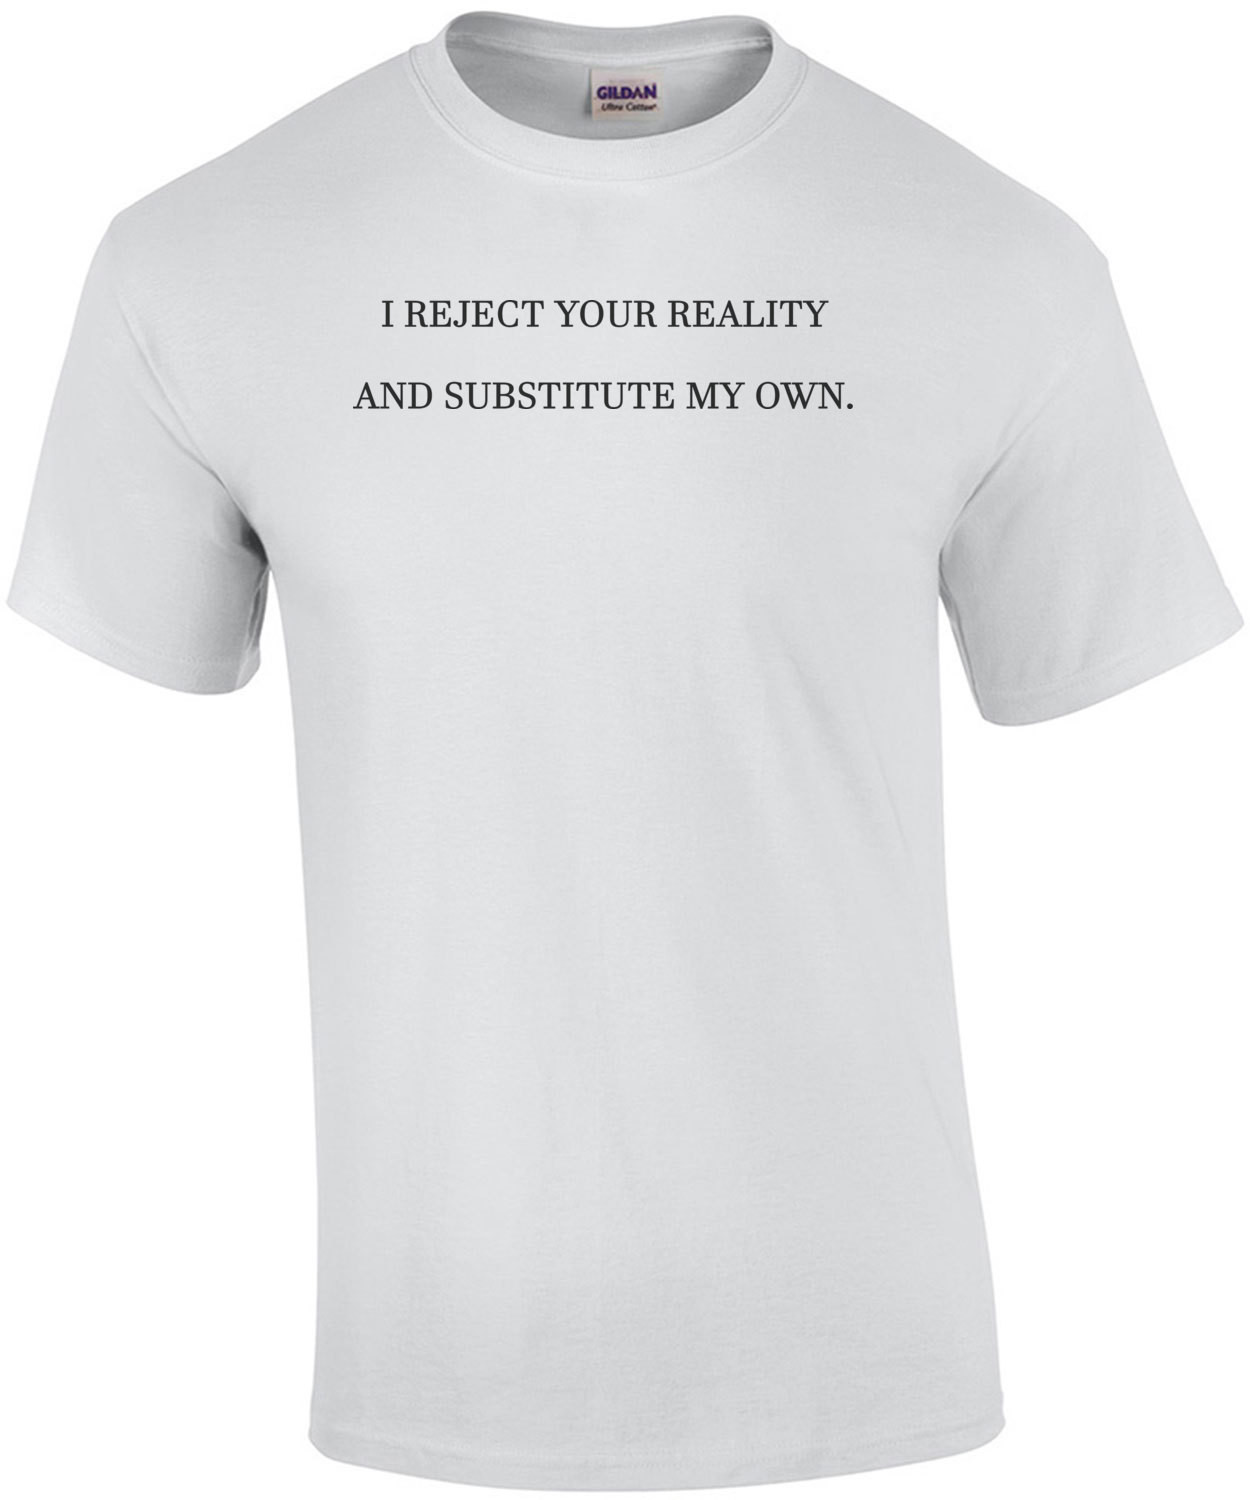 I reject your reality and substitute my own. Shirt